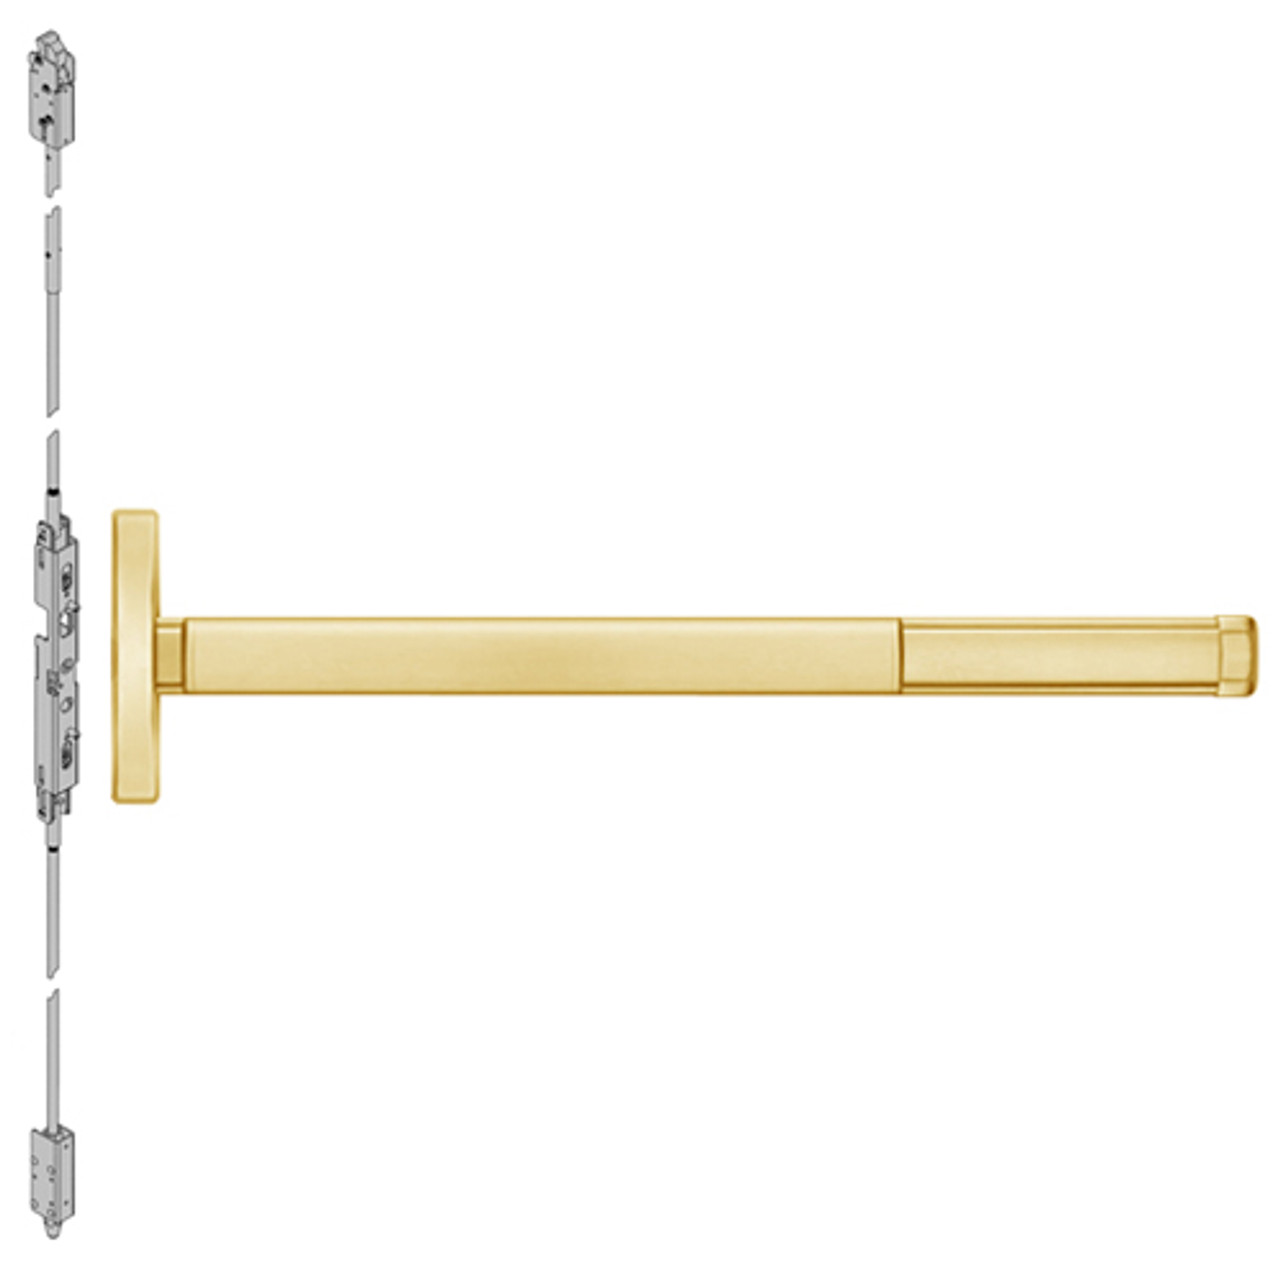 2603-605-48 PHI 2600 Series Non Fire Rated Concealed Vertical Rod Exit Device Prepped for Key Retracts Latchbolt in Bright Brass Finish